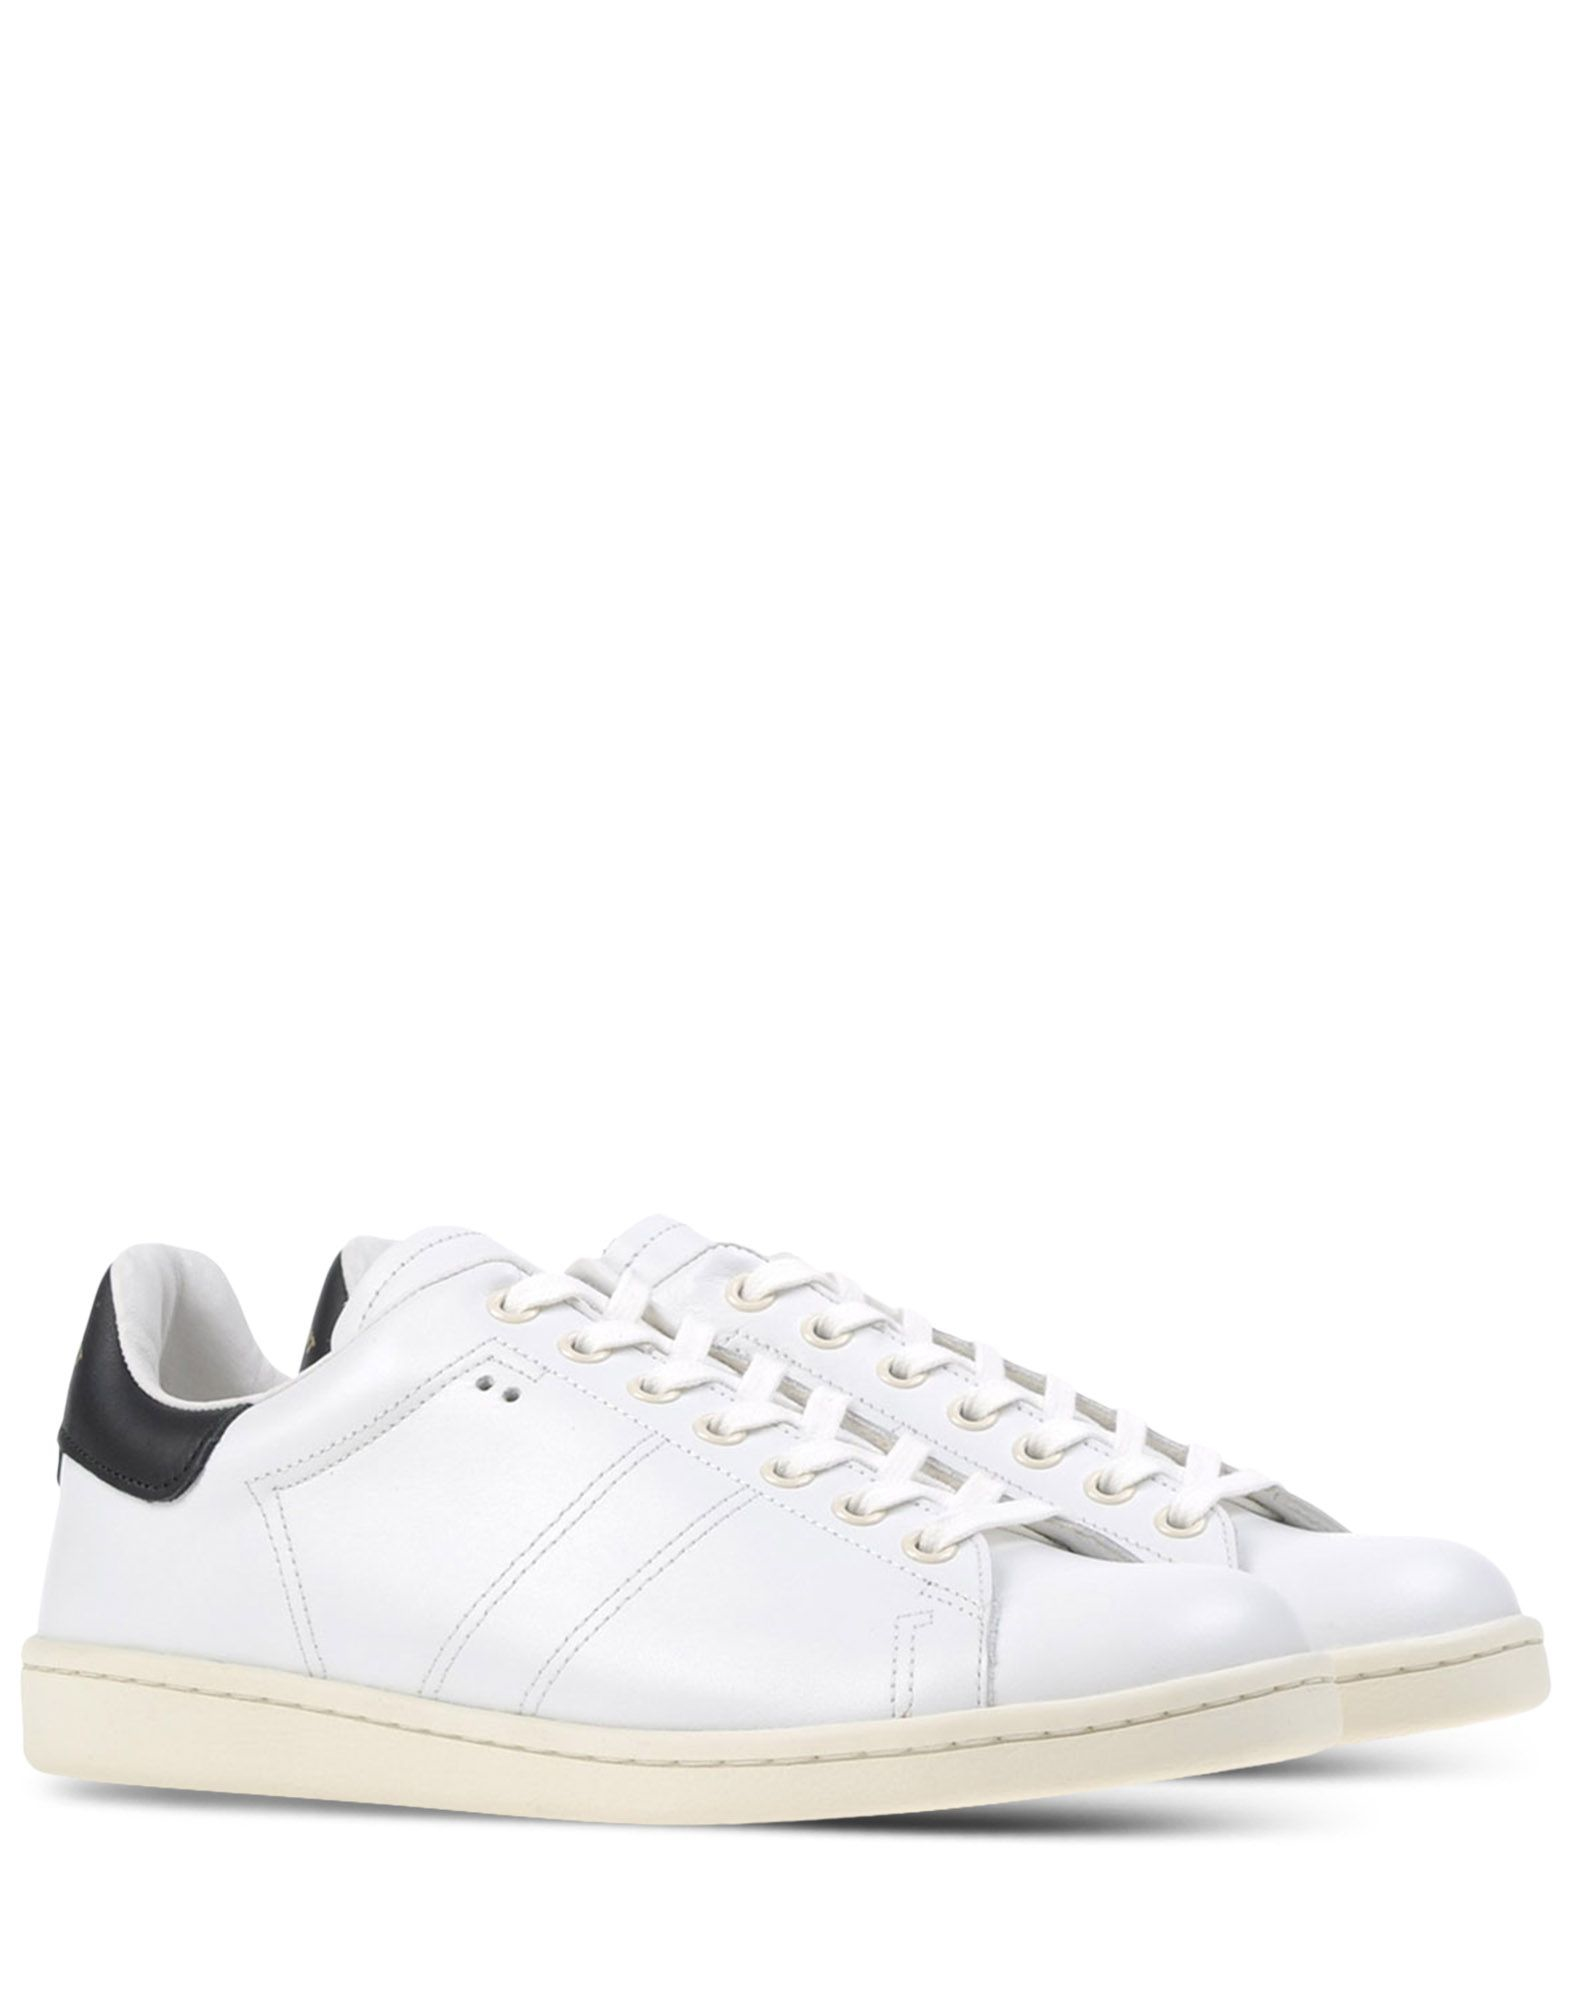 Étoile isabel marant Logo-Detail Low-Top Sneakers in White | Lyst